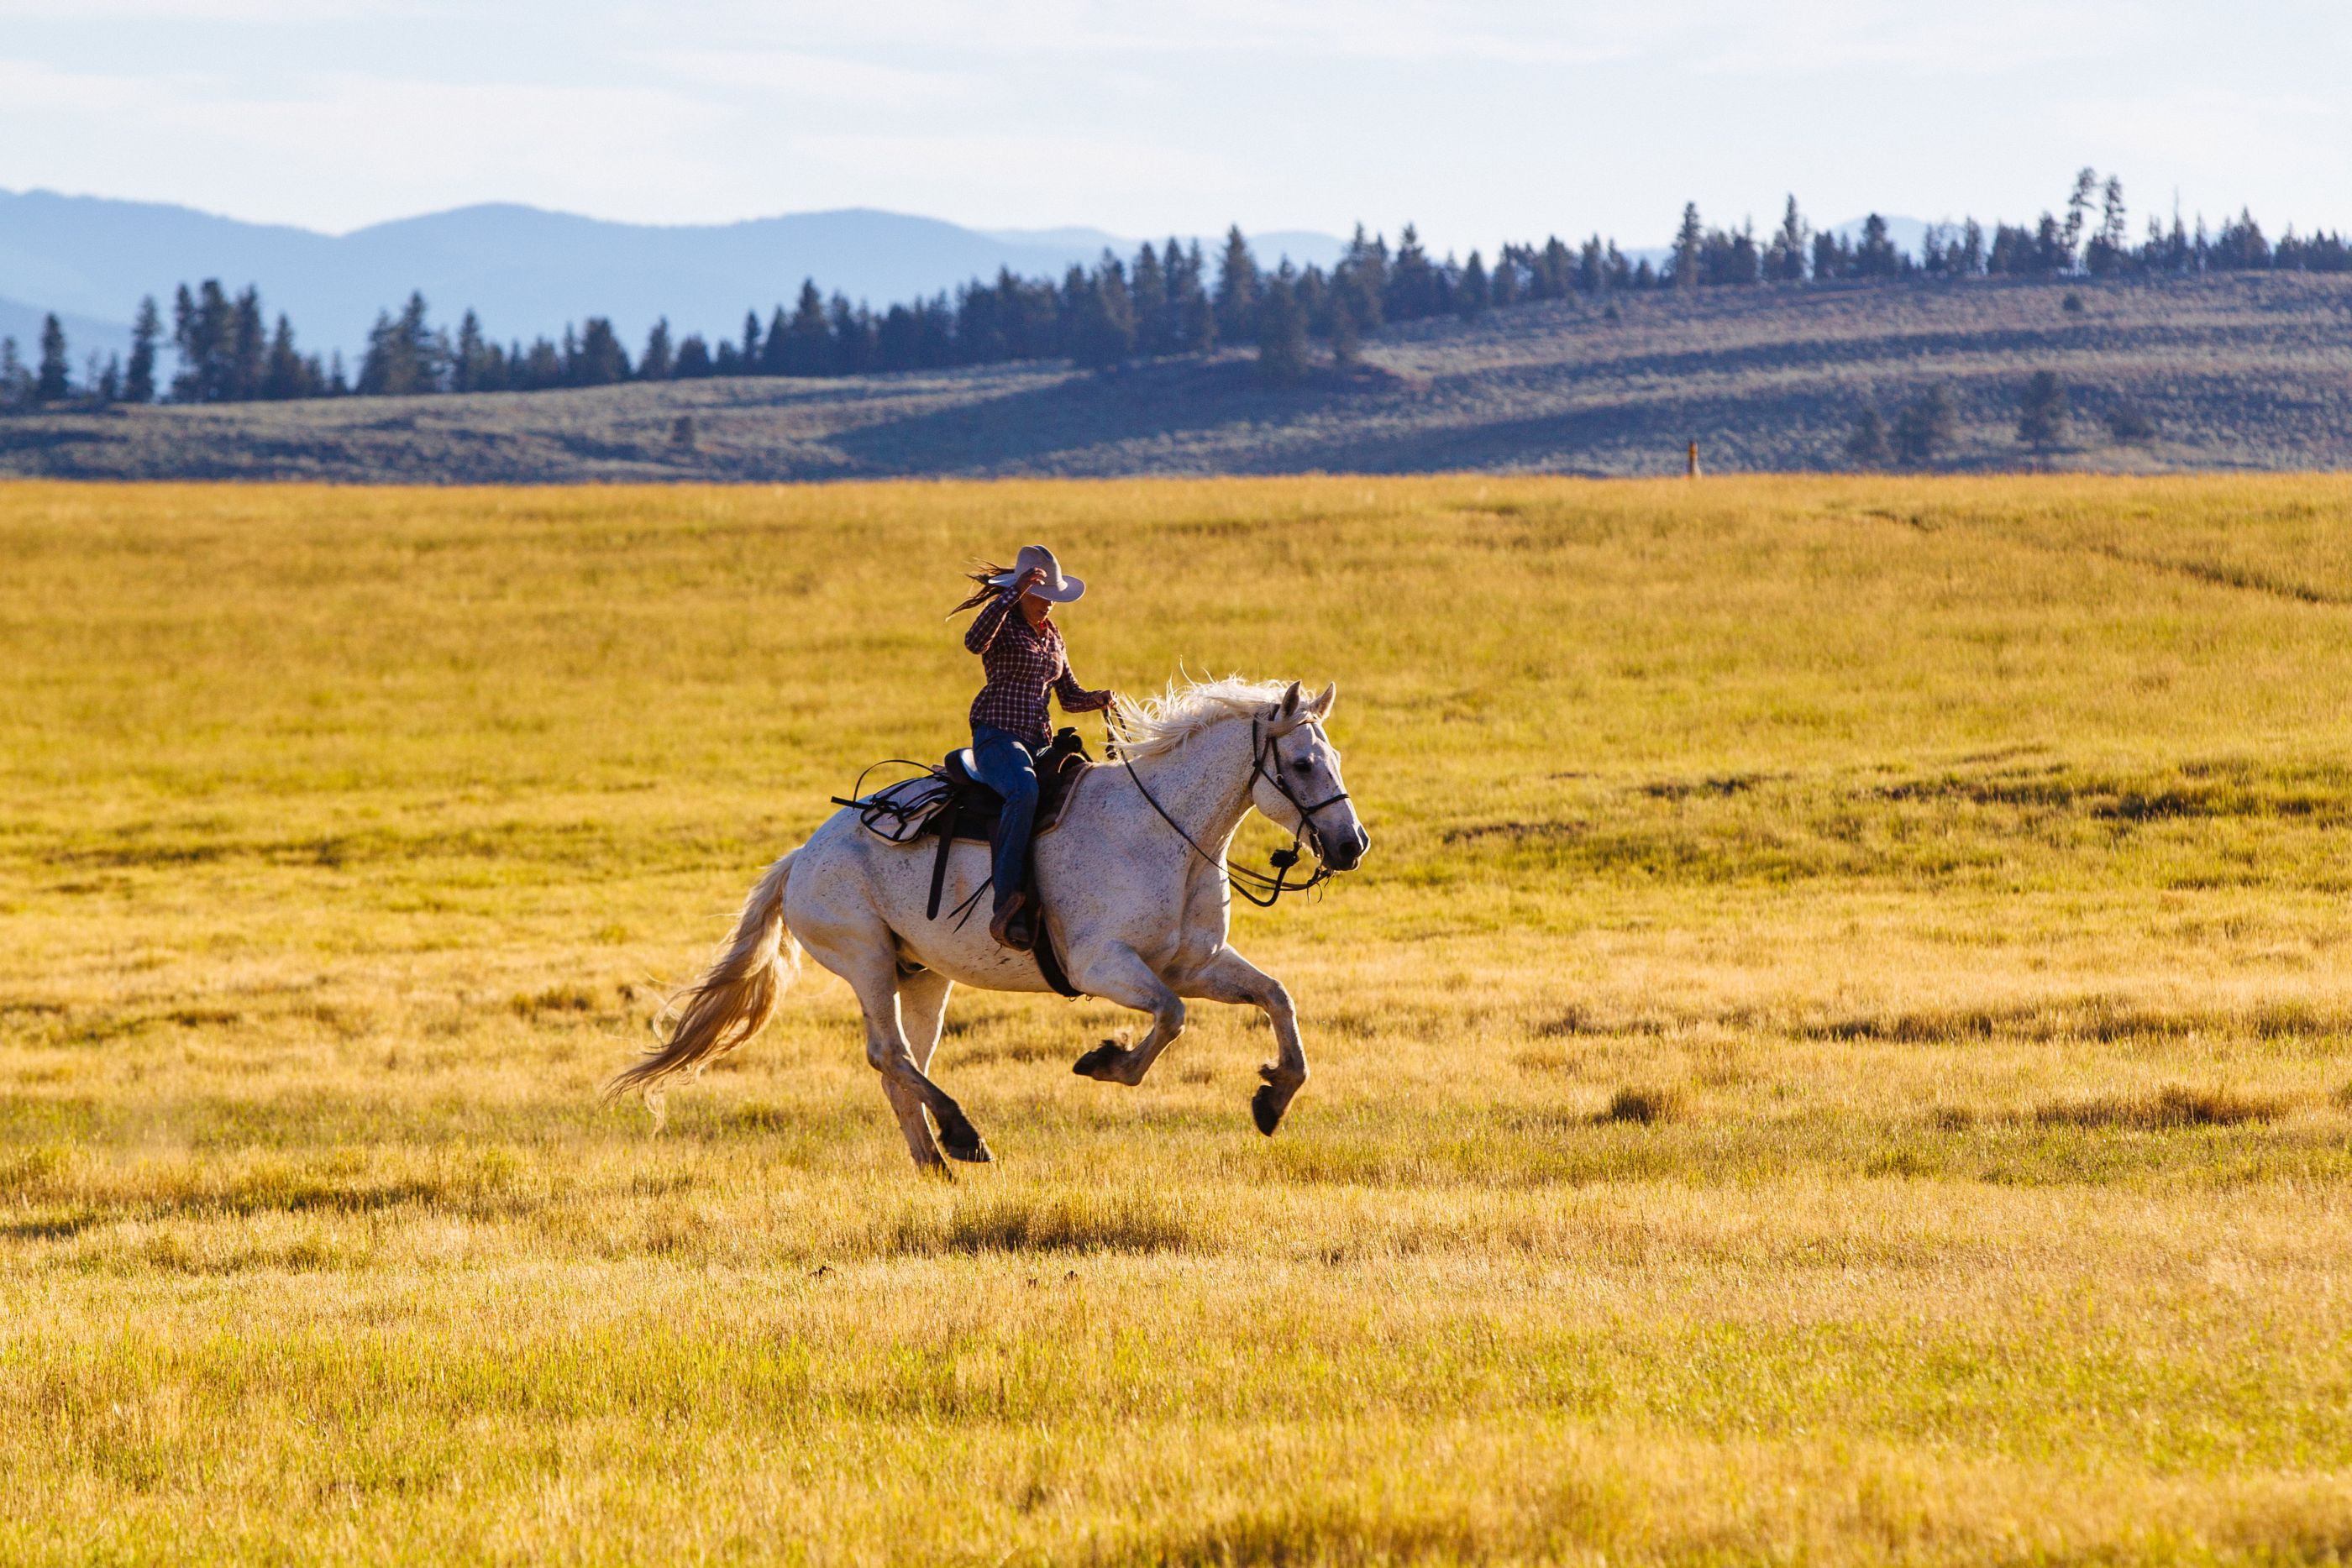 Horse riding on the lands near Paws Up Ranch, USA